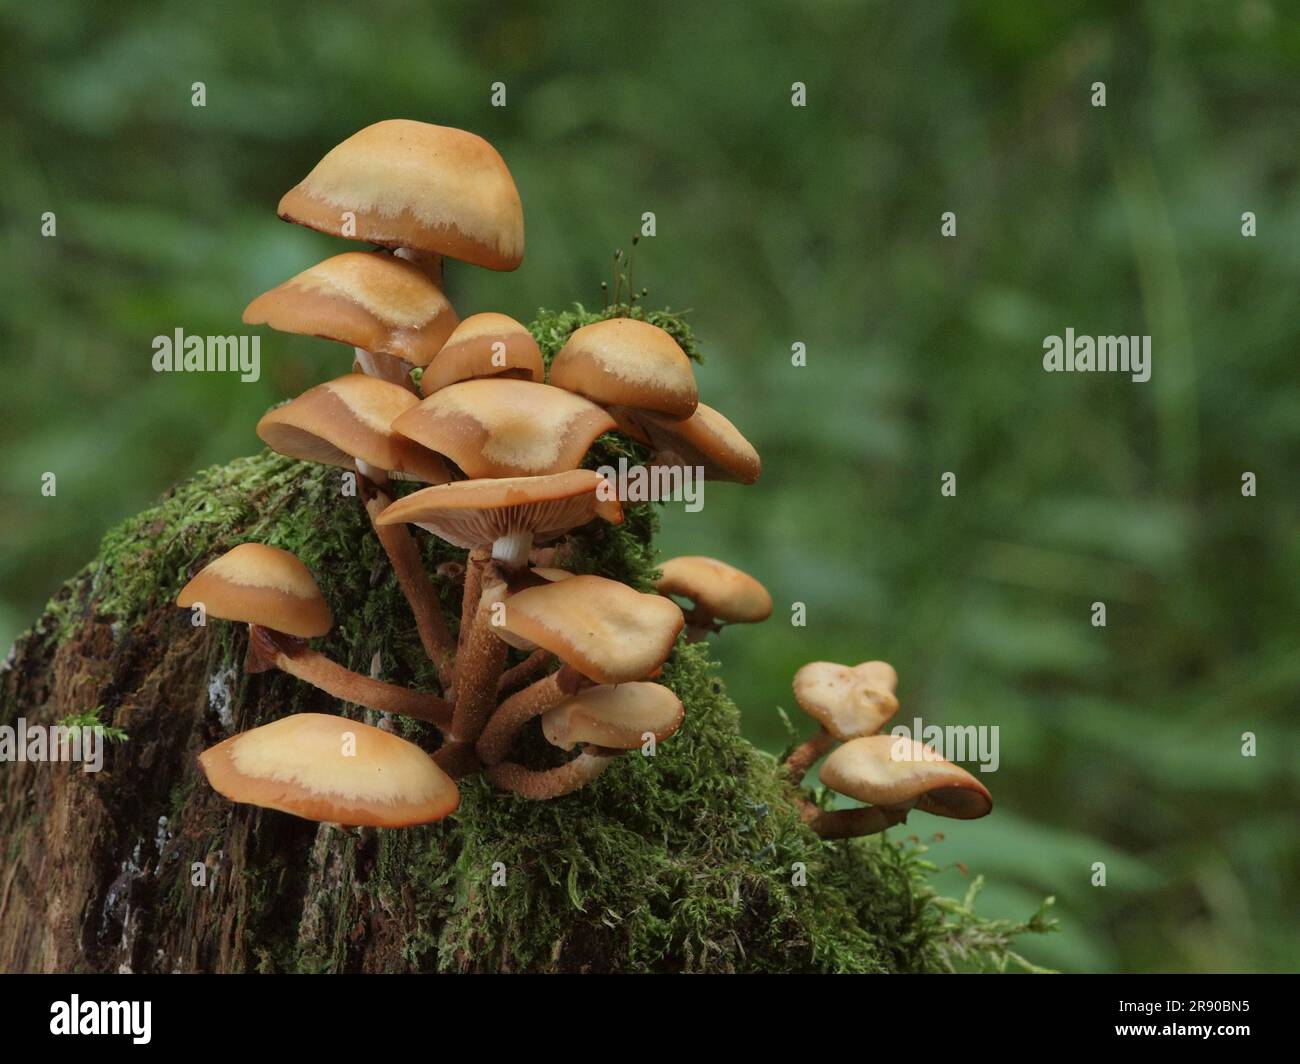 Kuehneromyces mutabilis (synonym: Pholiota mutabilis), commonly known as the sheathed woodtuft, is an edible fungus which grows in clumps on tree Stock Photo